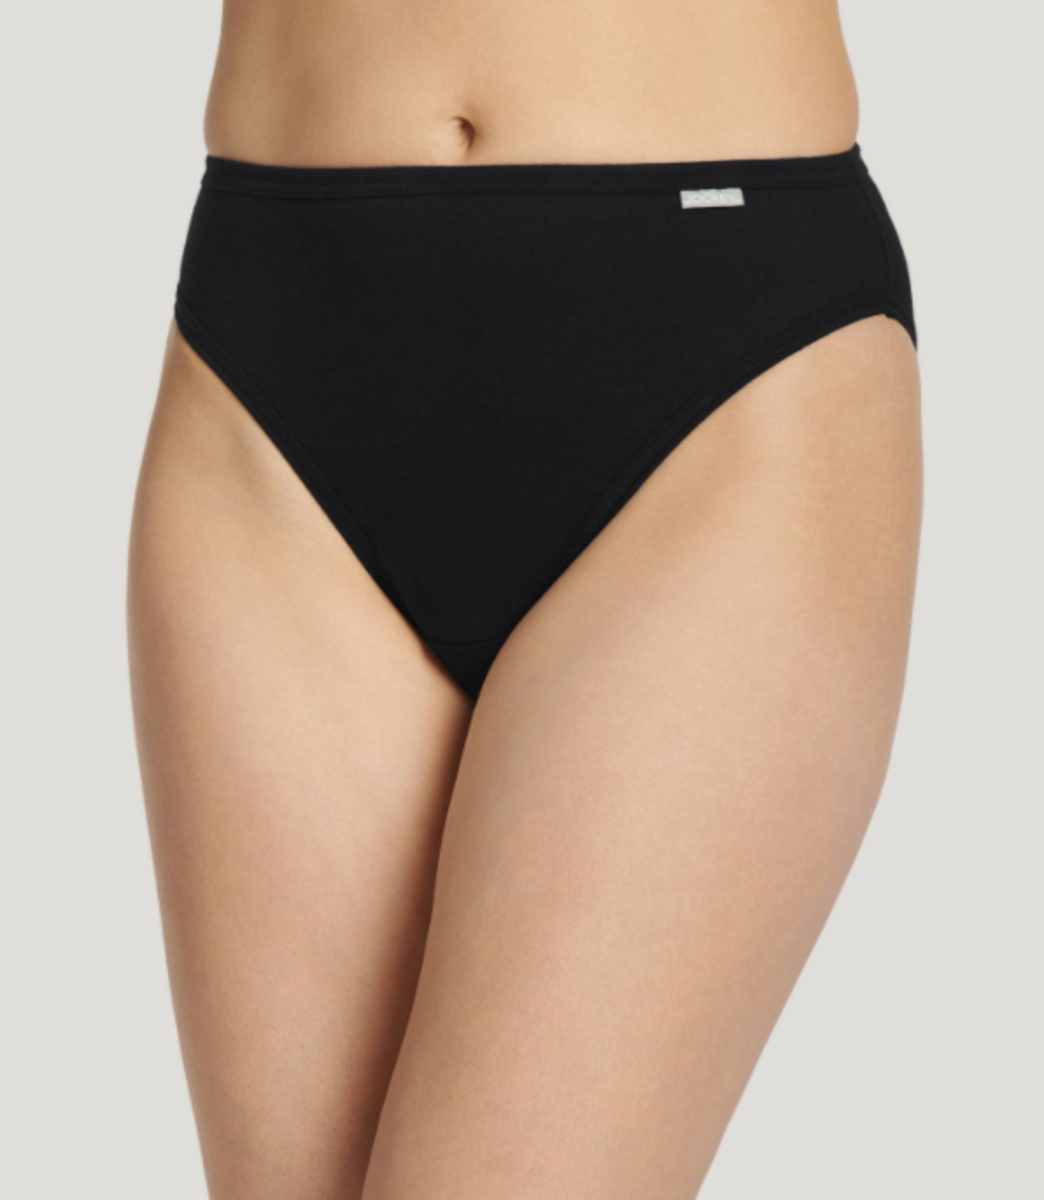 French-Cut panties (viewed from the front).